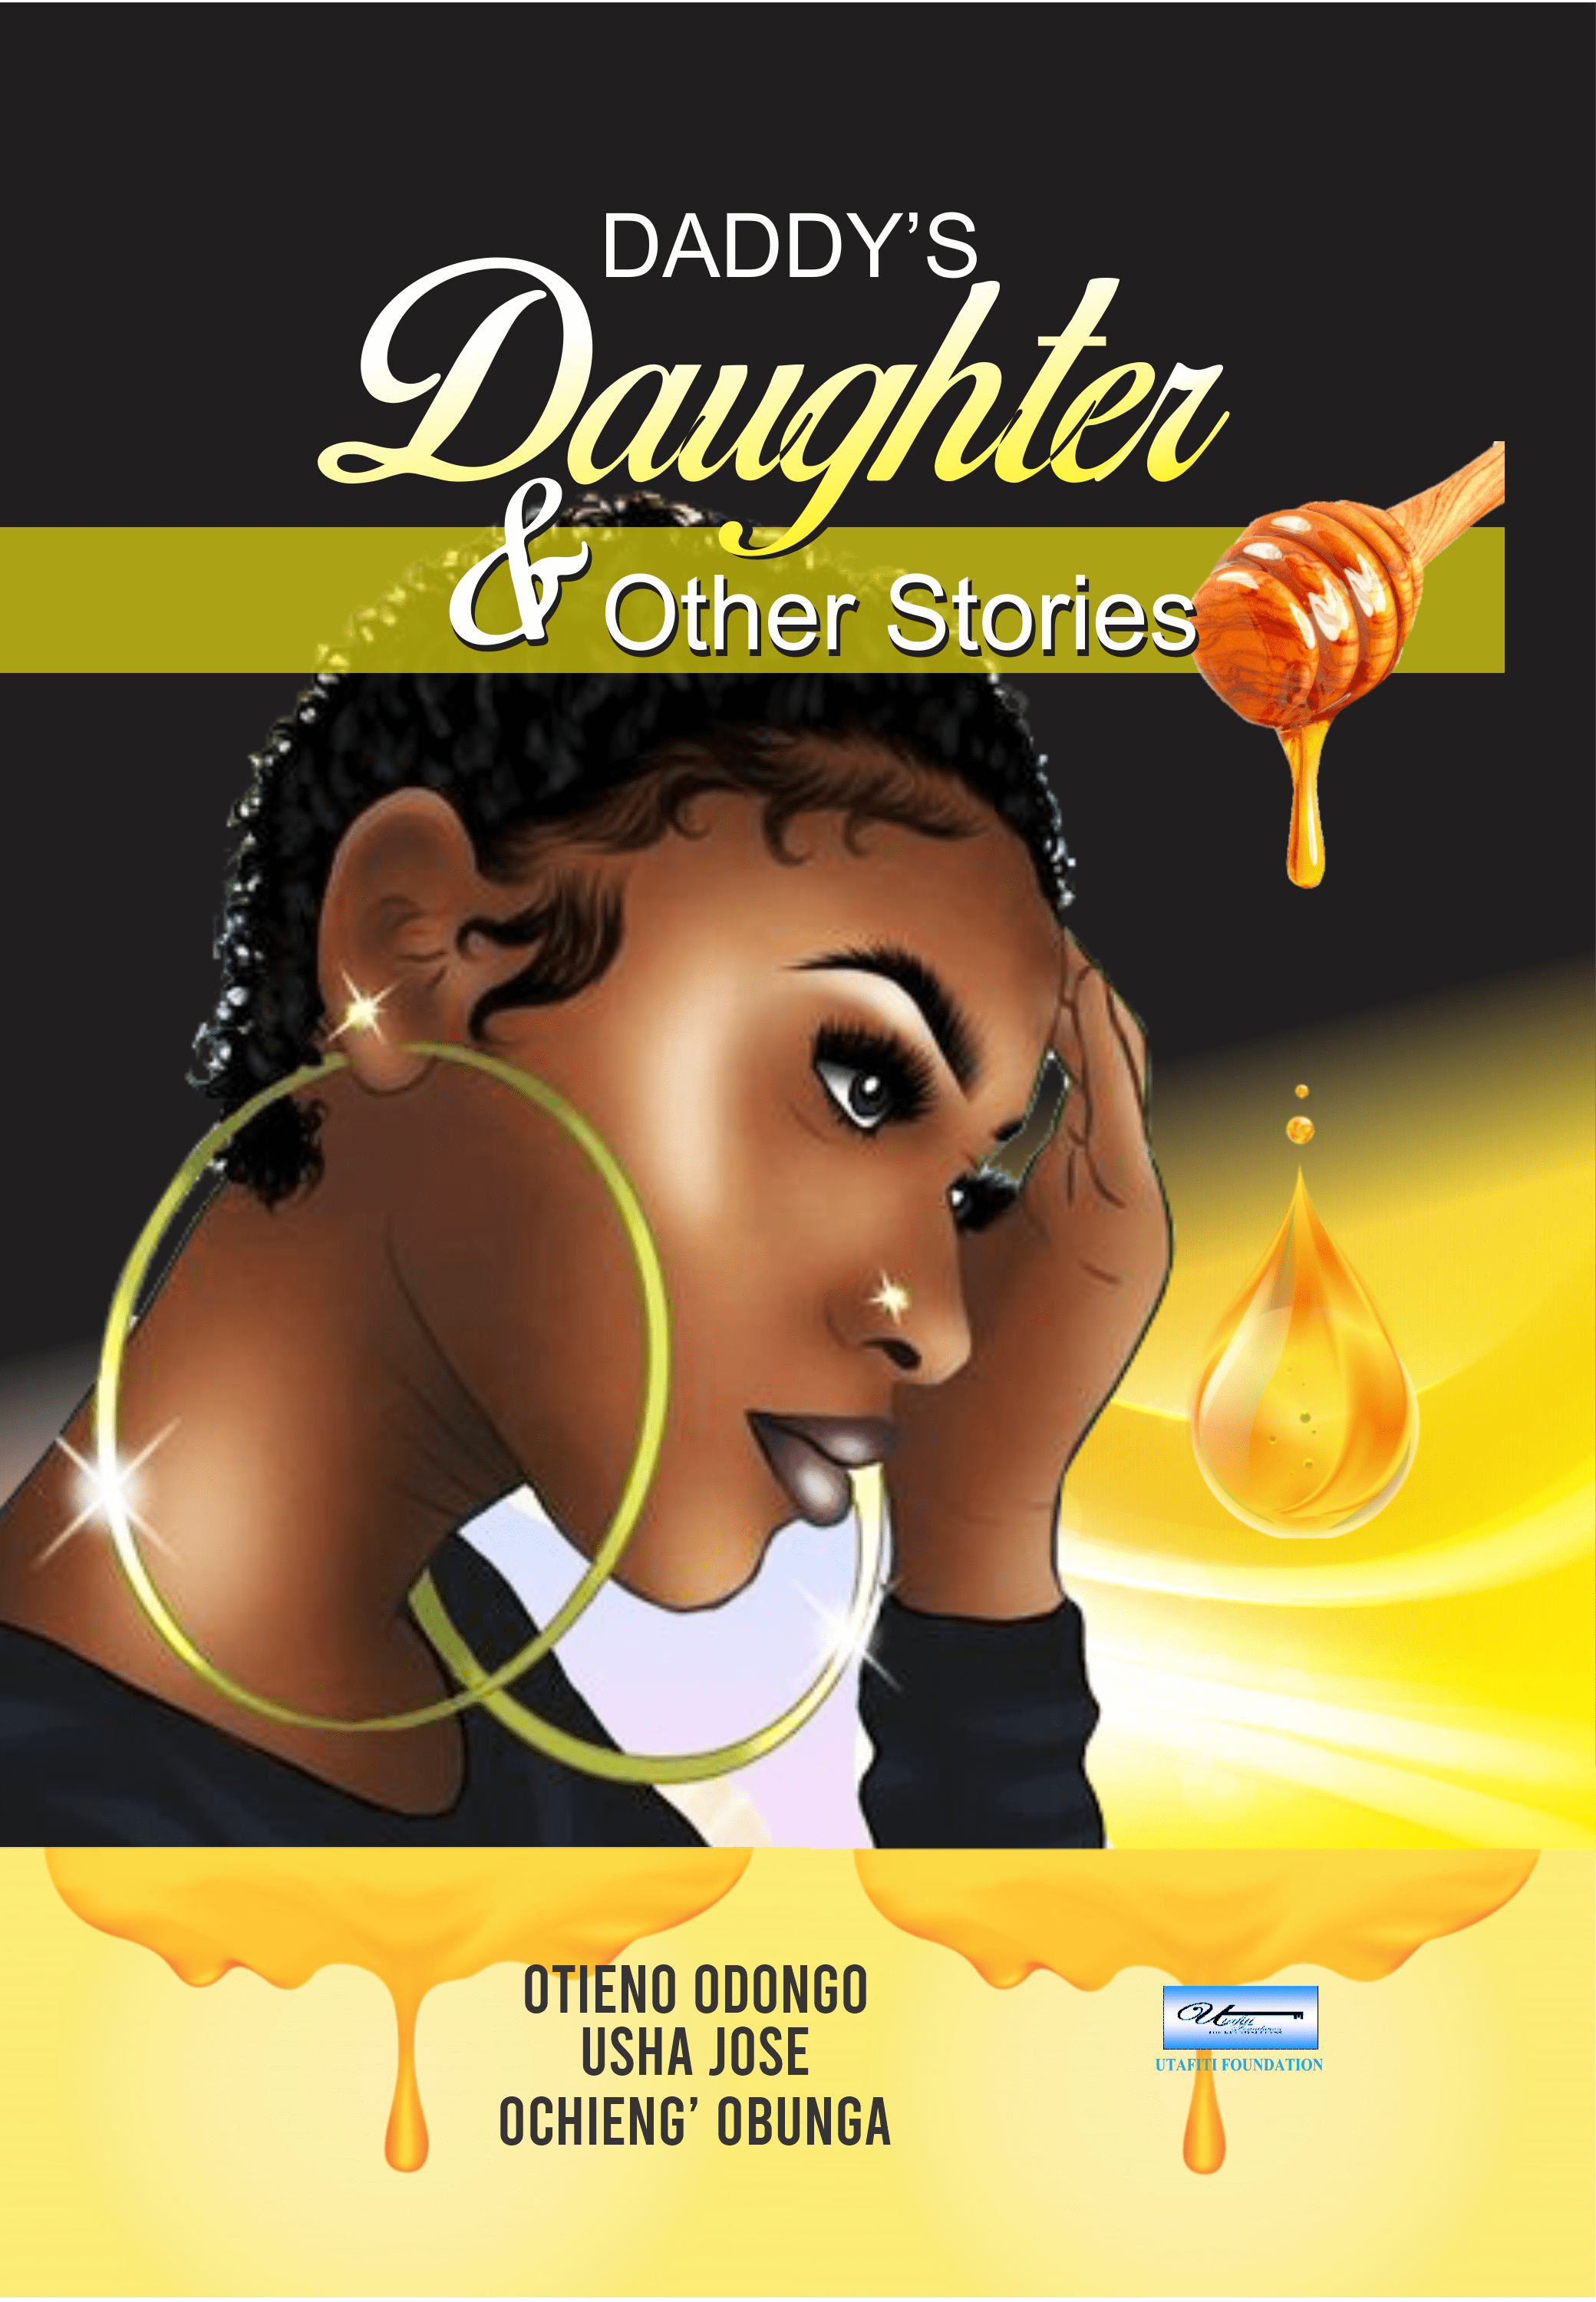 Daddys-Daughter-UF-Cover-fINAL-pRINT-2021